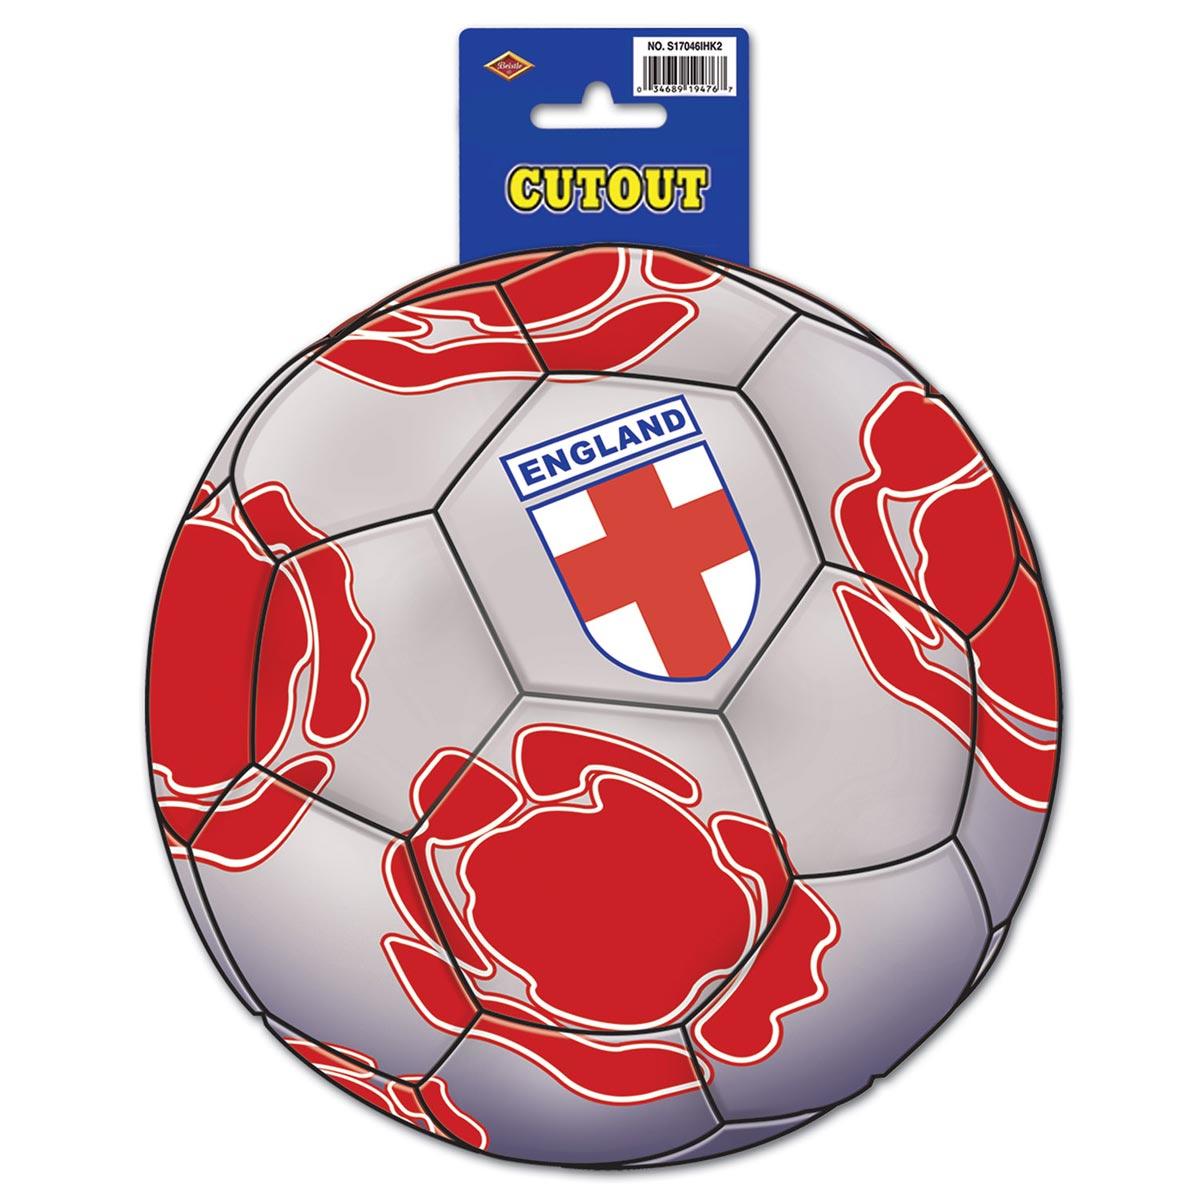 10" England Football Themed Cutout by Beistle 54496-ENG available here at Karnival Costumes online party shop